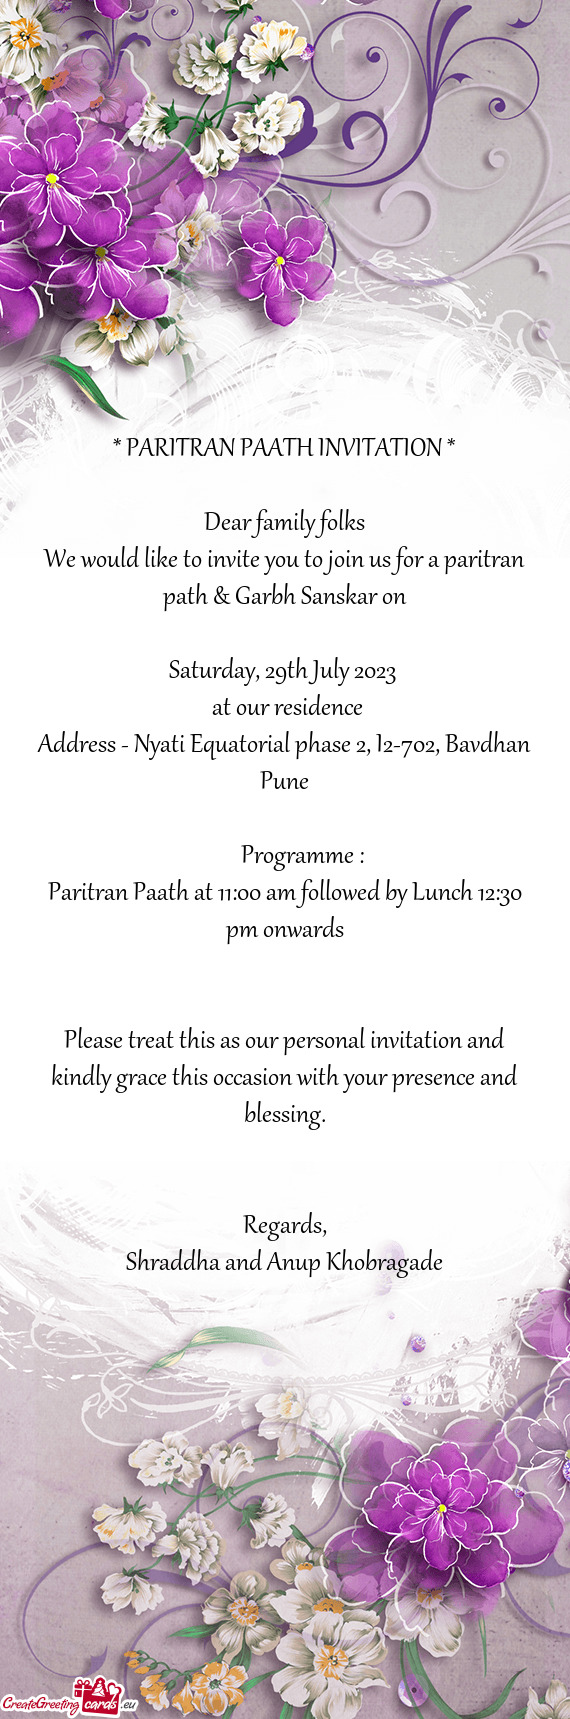 Paritran Paath at 11:00 am followed by Lunch 12:30 pm onwards